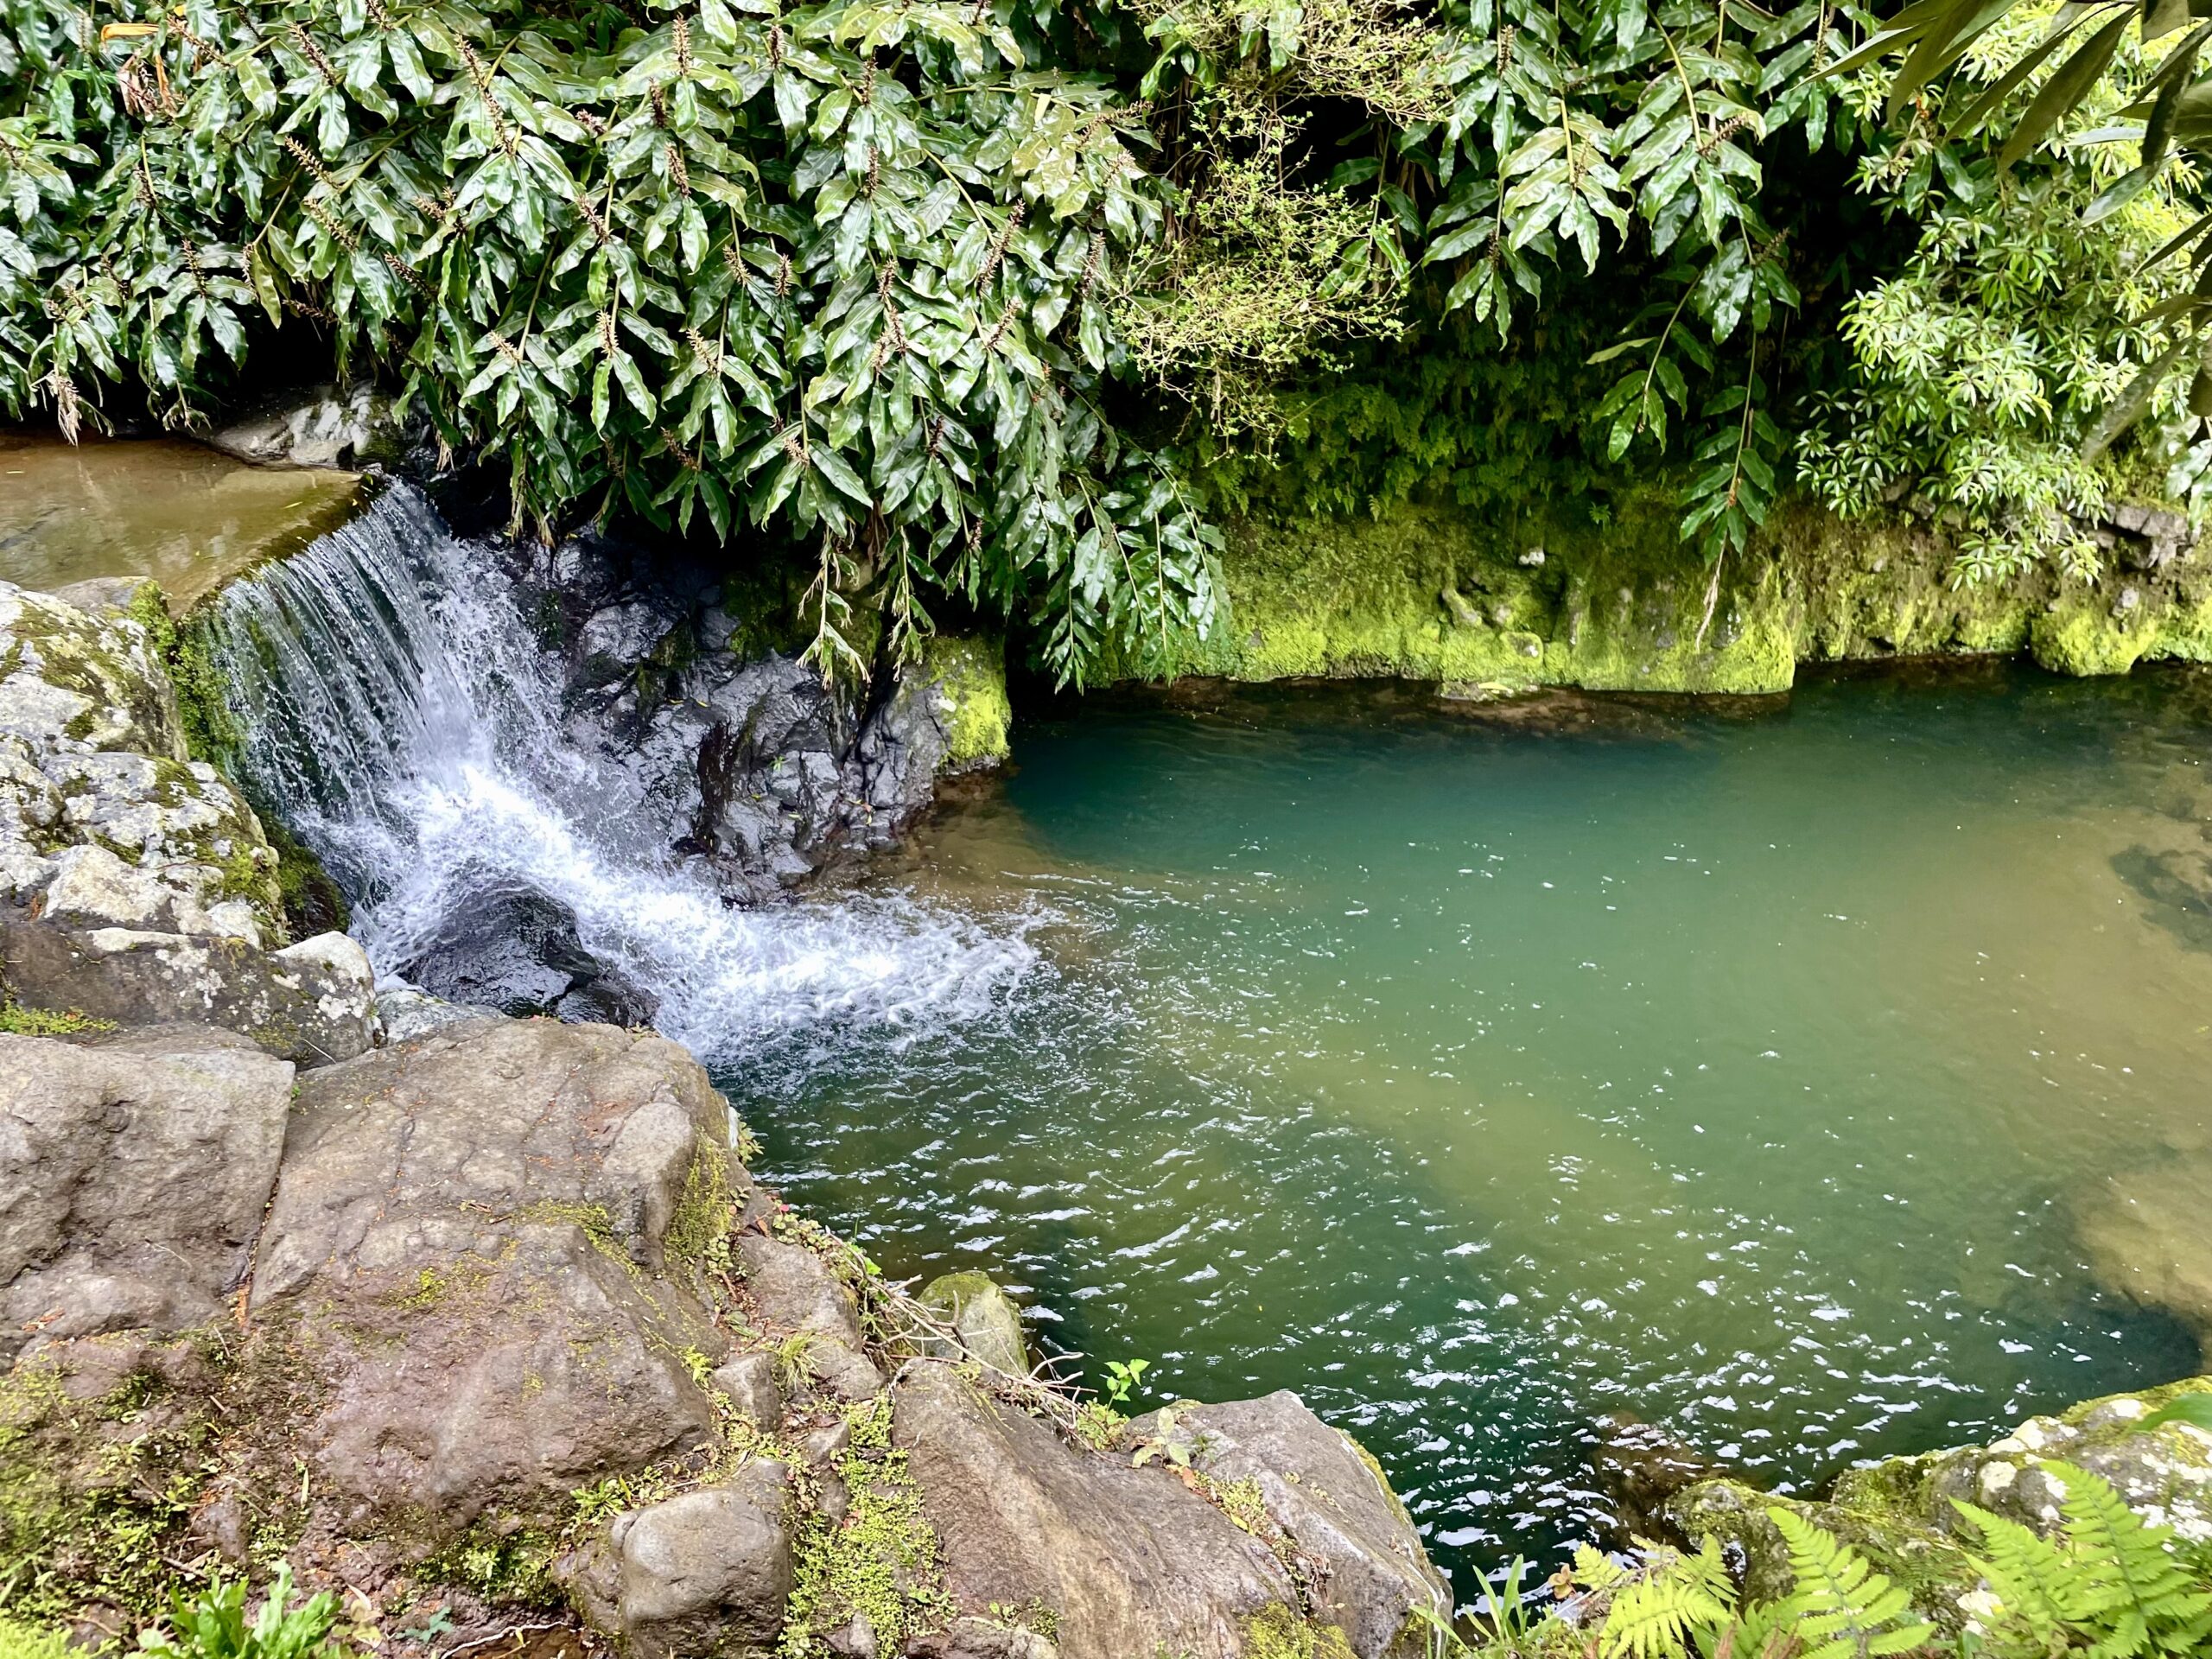 Why Sao Miguel In The Azores Should Be Next On Your Bucket List